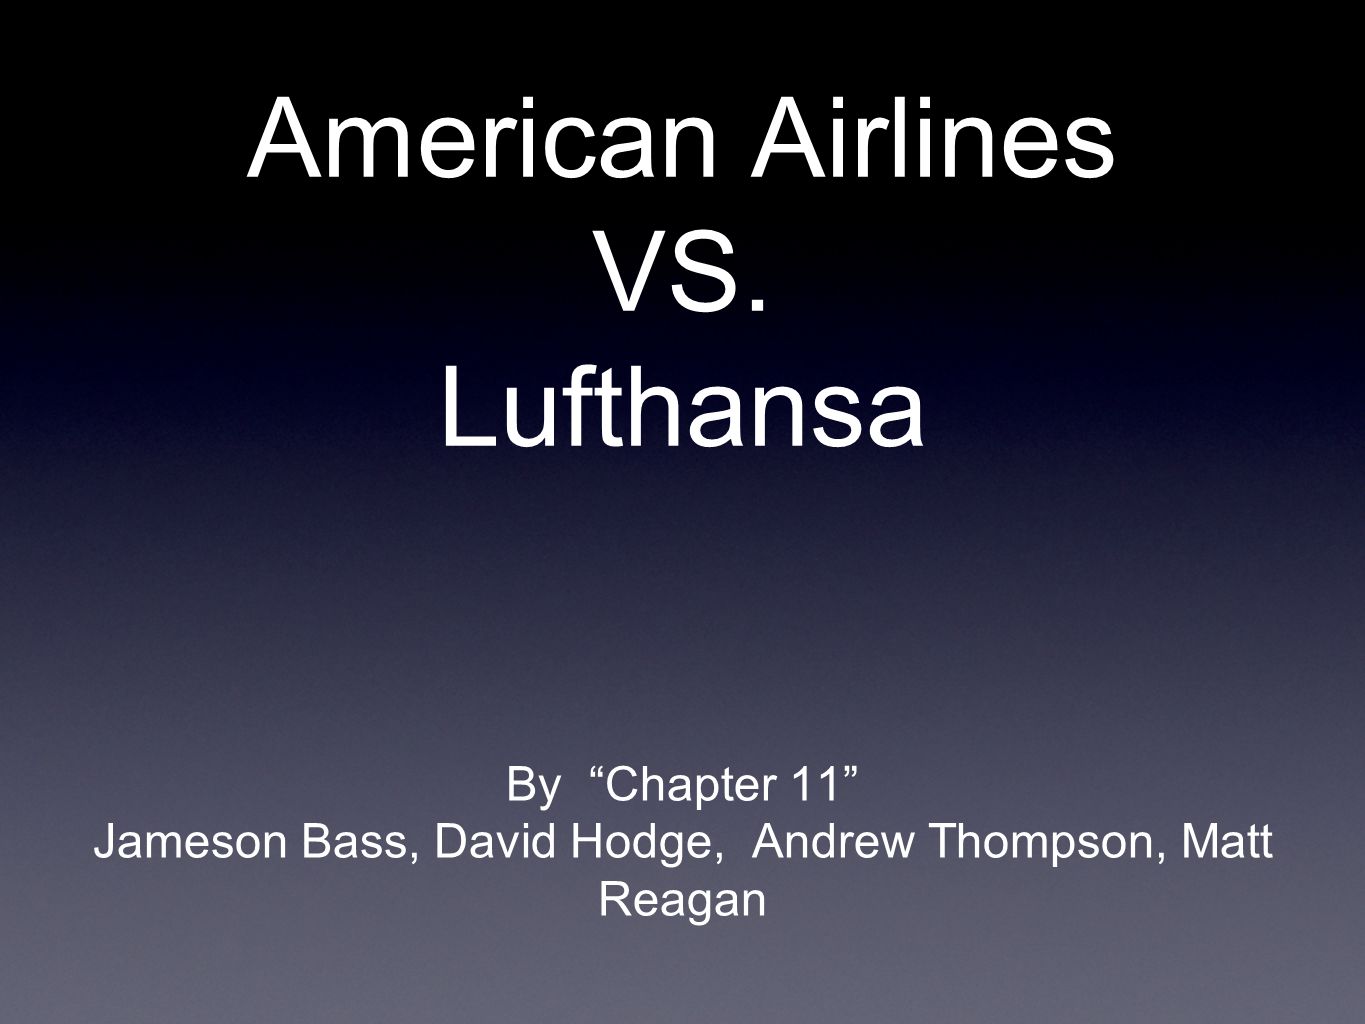 American Airlines VS. Lufthansa - ppt video online download